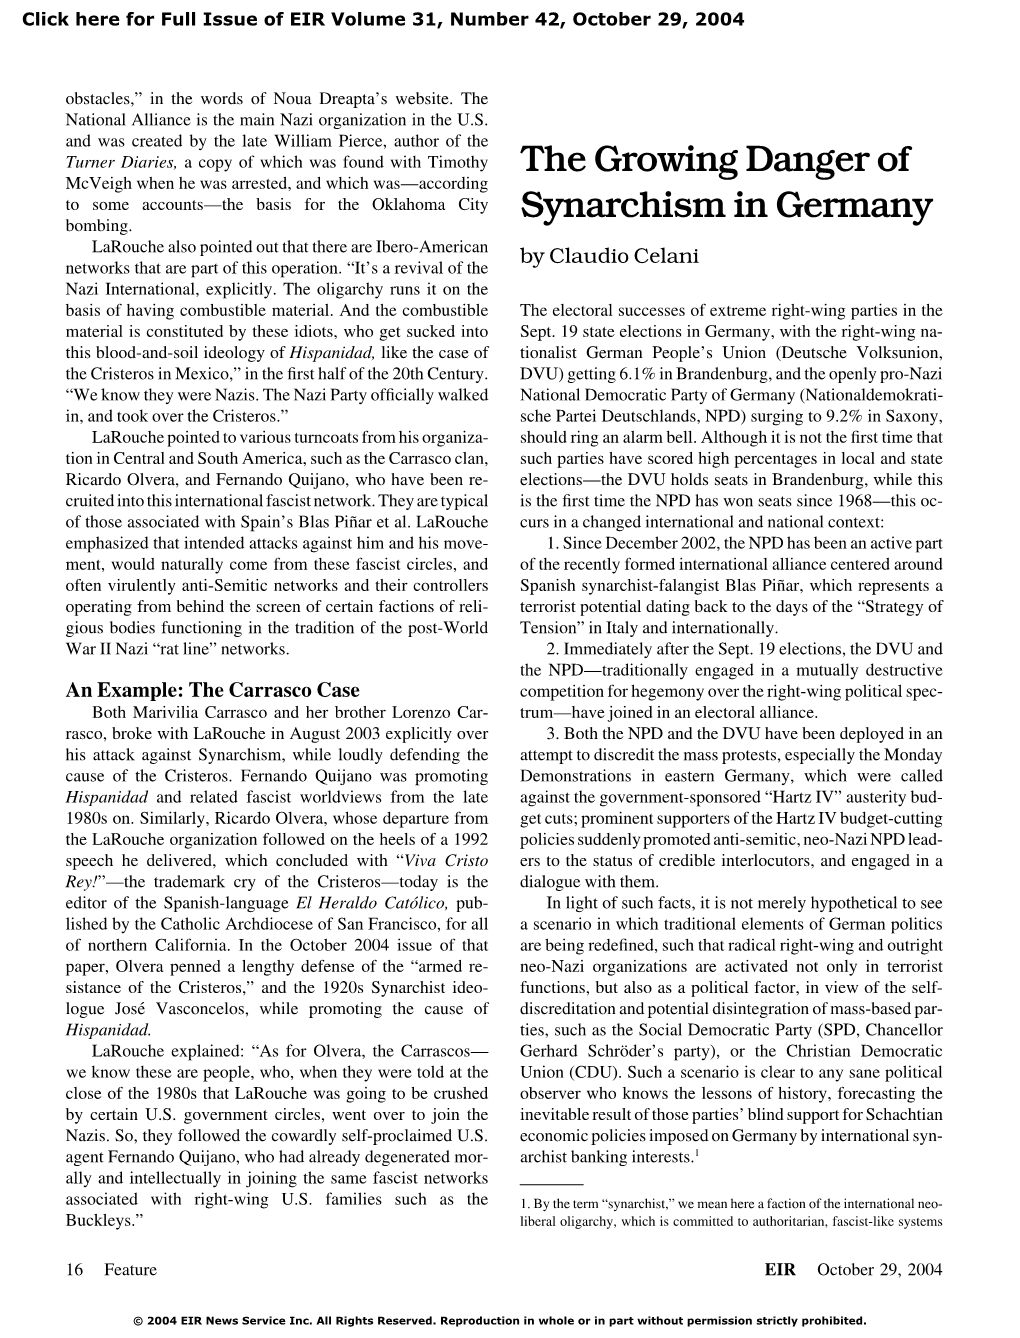 The Growing Danger of Synarchism in Germany